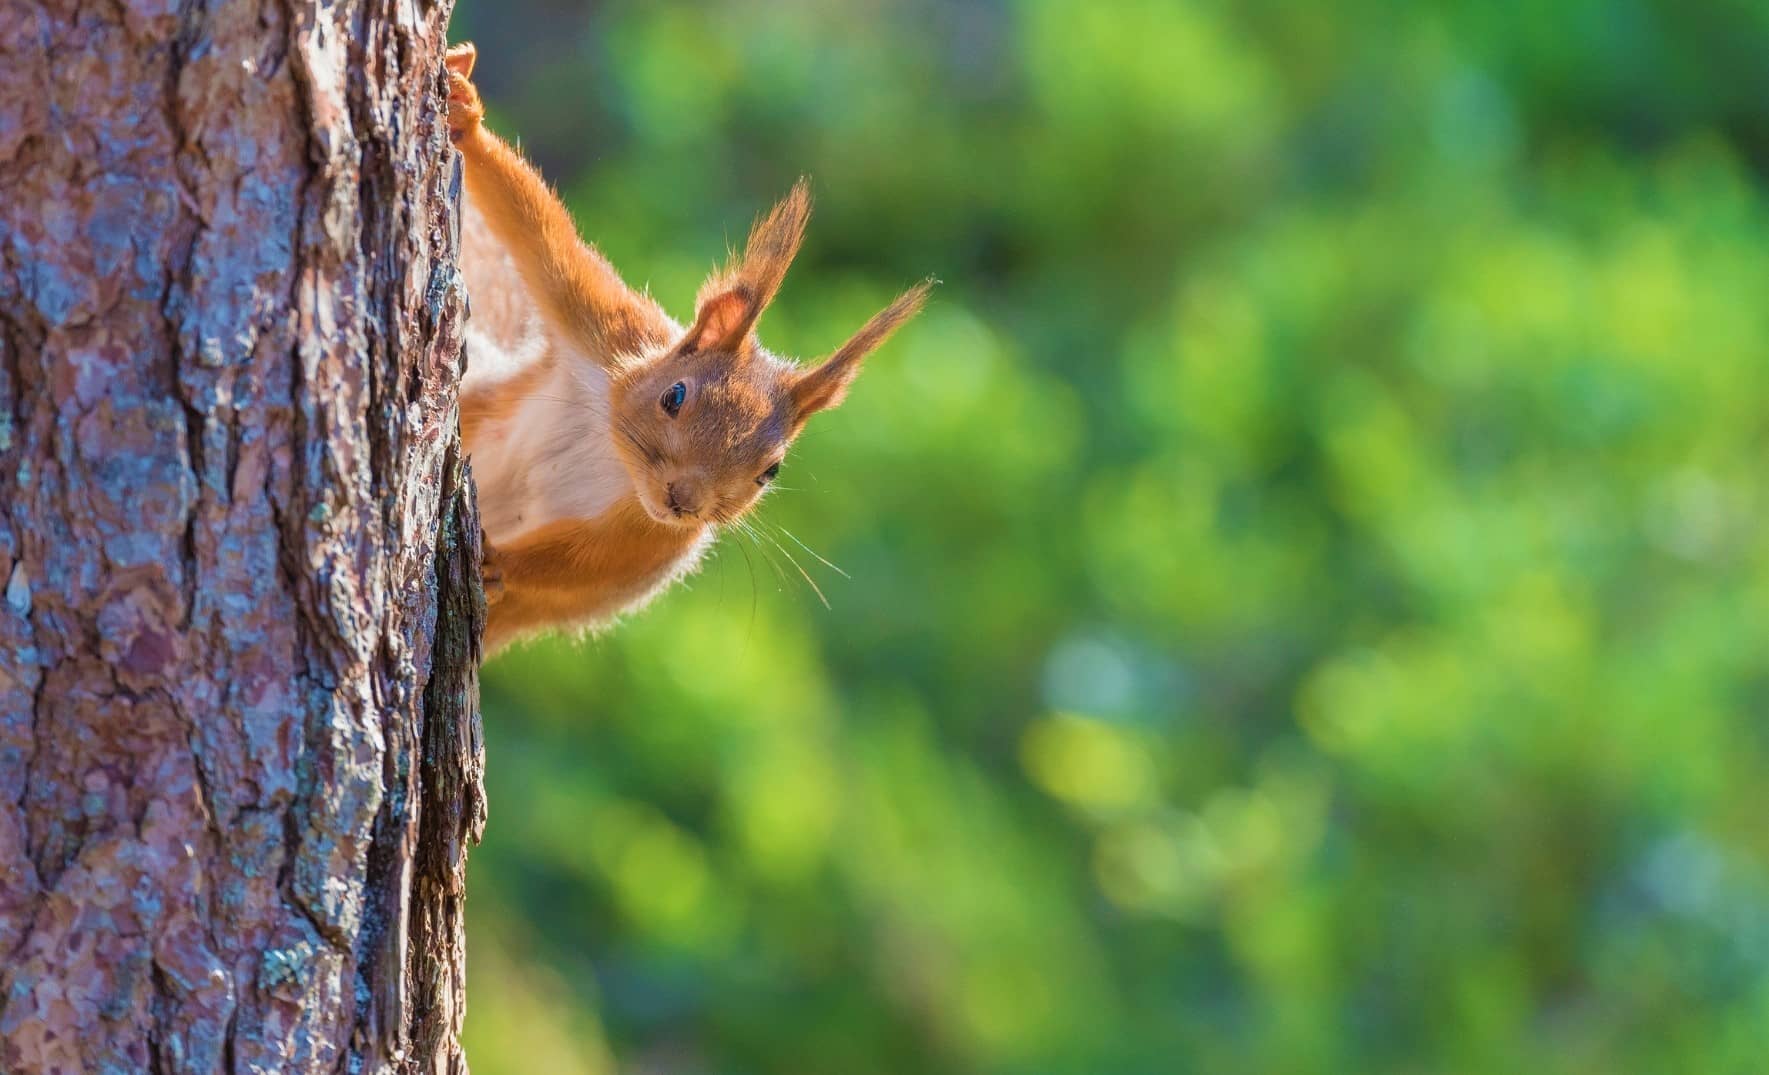 where do squirrels build their nests and do tree squirrels hibernate in their nests